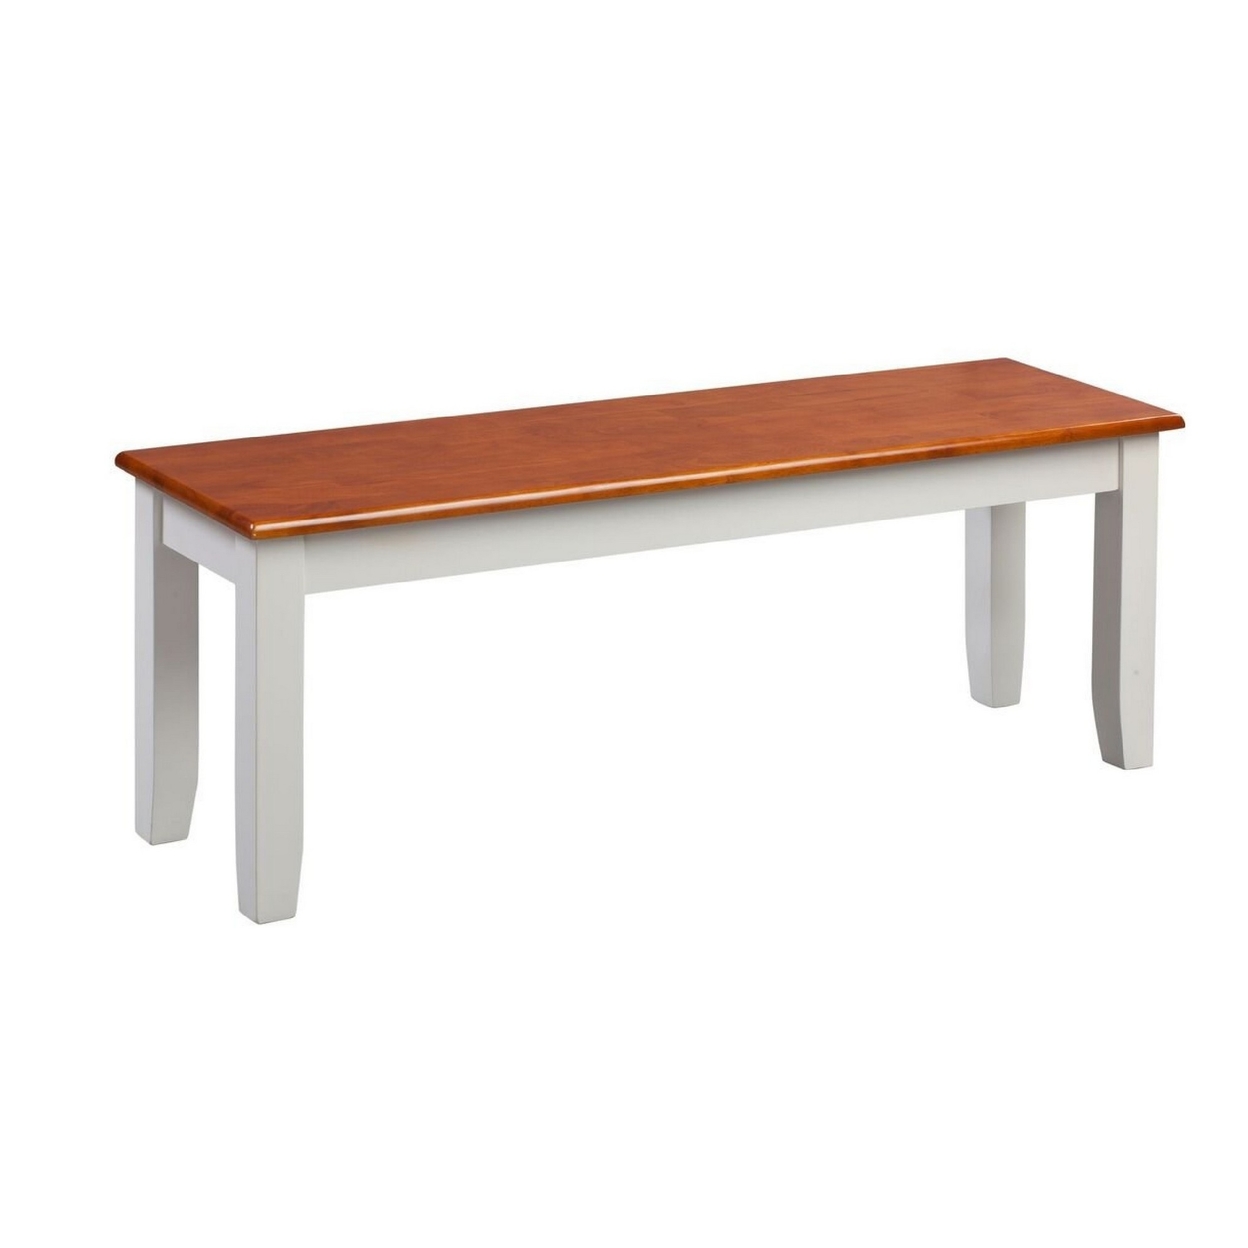 Zoy 48 Inch Wood Dining Bench, Rich Brown Top, Classic White Tapered Legs- Saltoro Sherpi